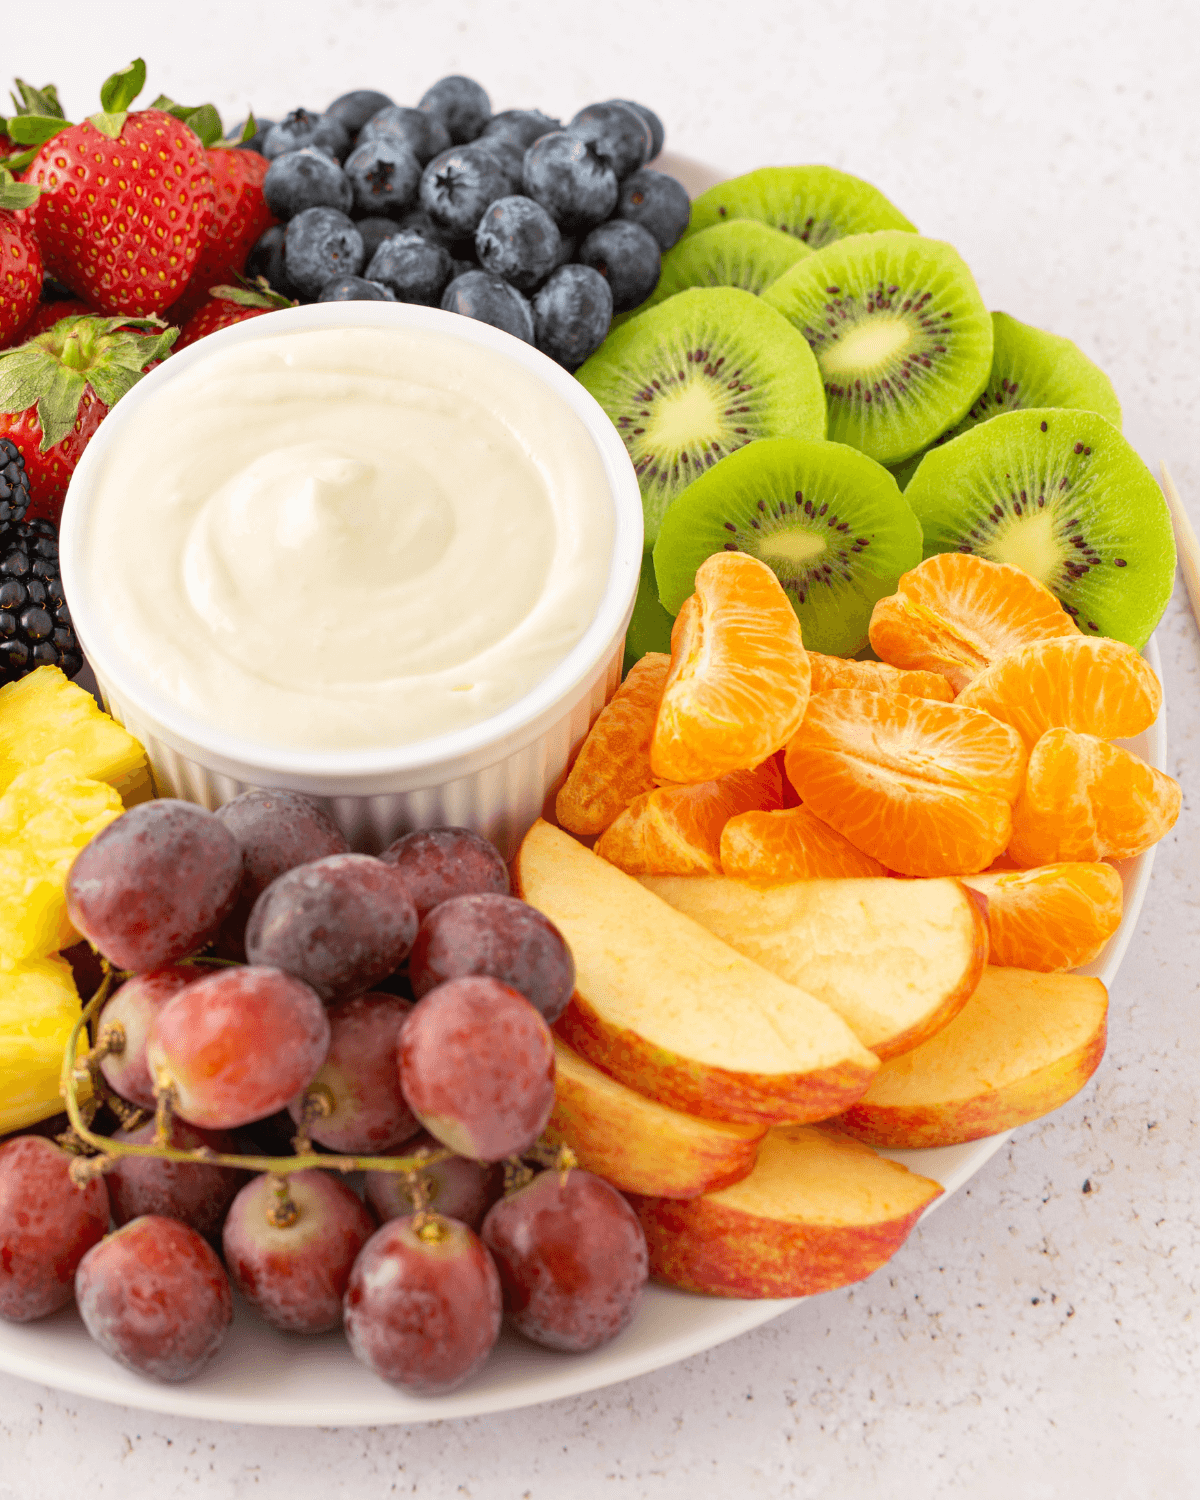 A colorful fruit platter with the dessert.